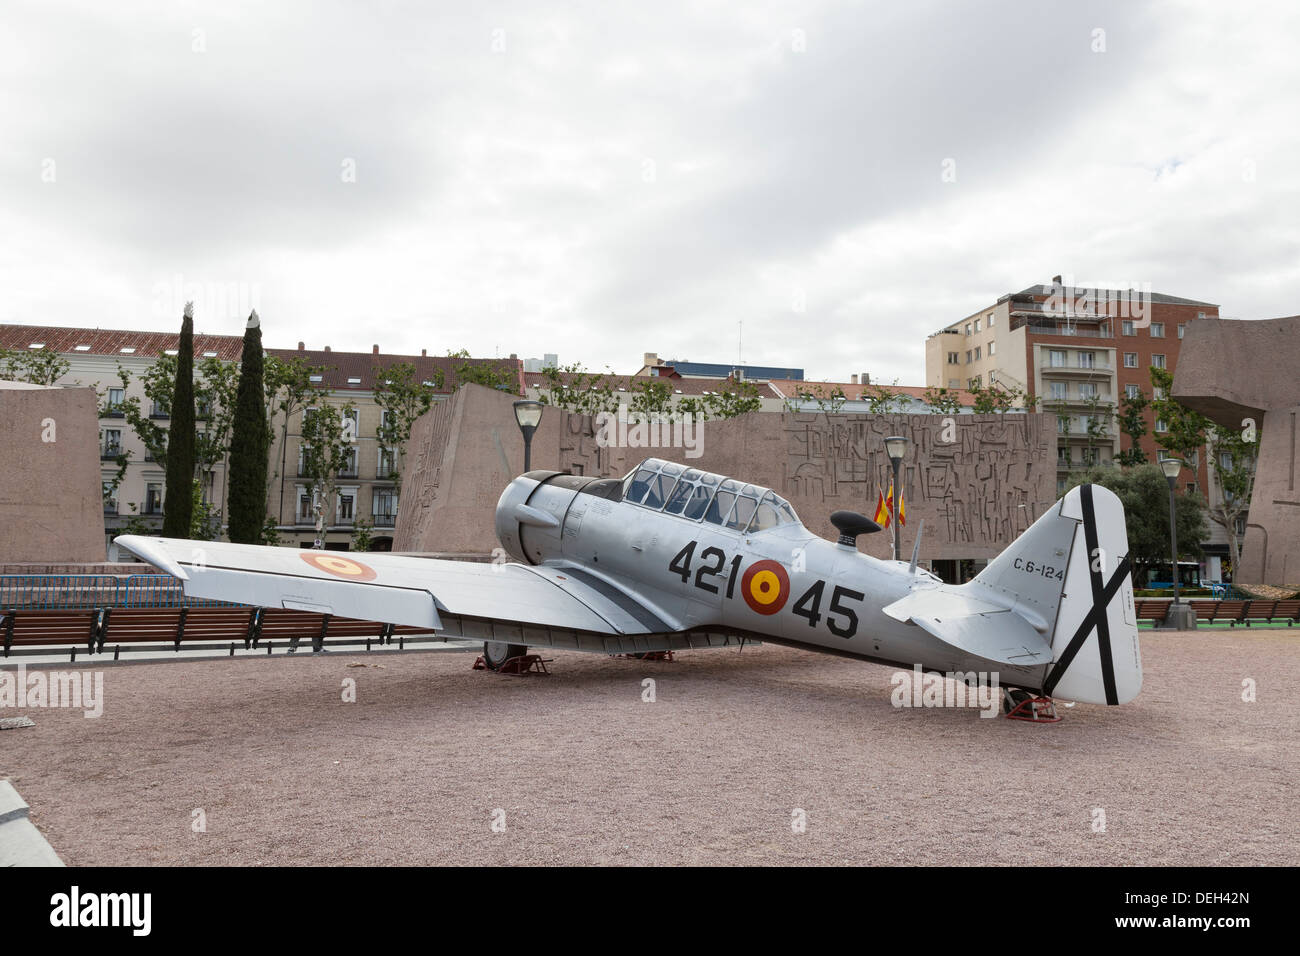 North American T-6 Texan airplane on display in Plaza de Colón - Alonso Martínez, Madrid, Community of Madrid, Spain Stock Photo